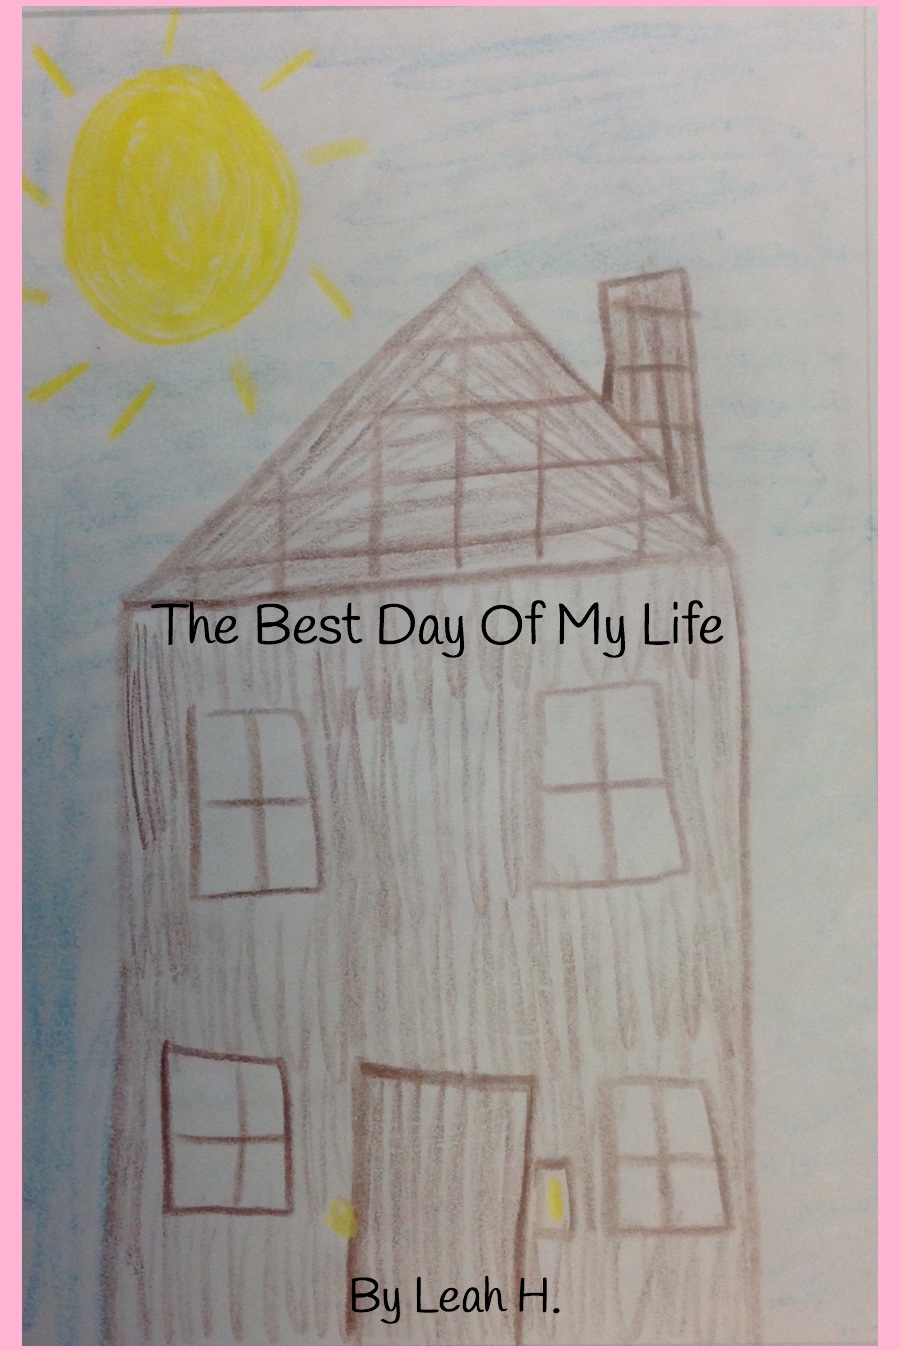 The Best Day of my Life By Leah H